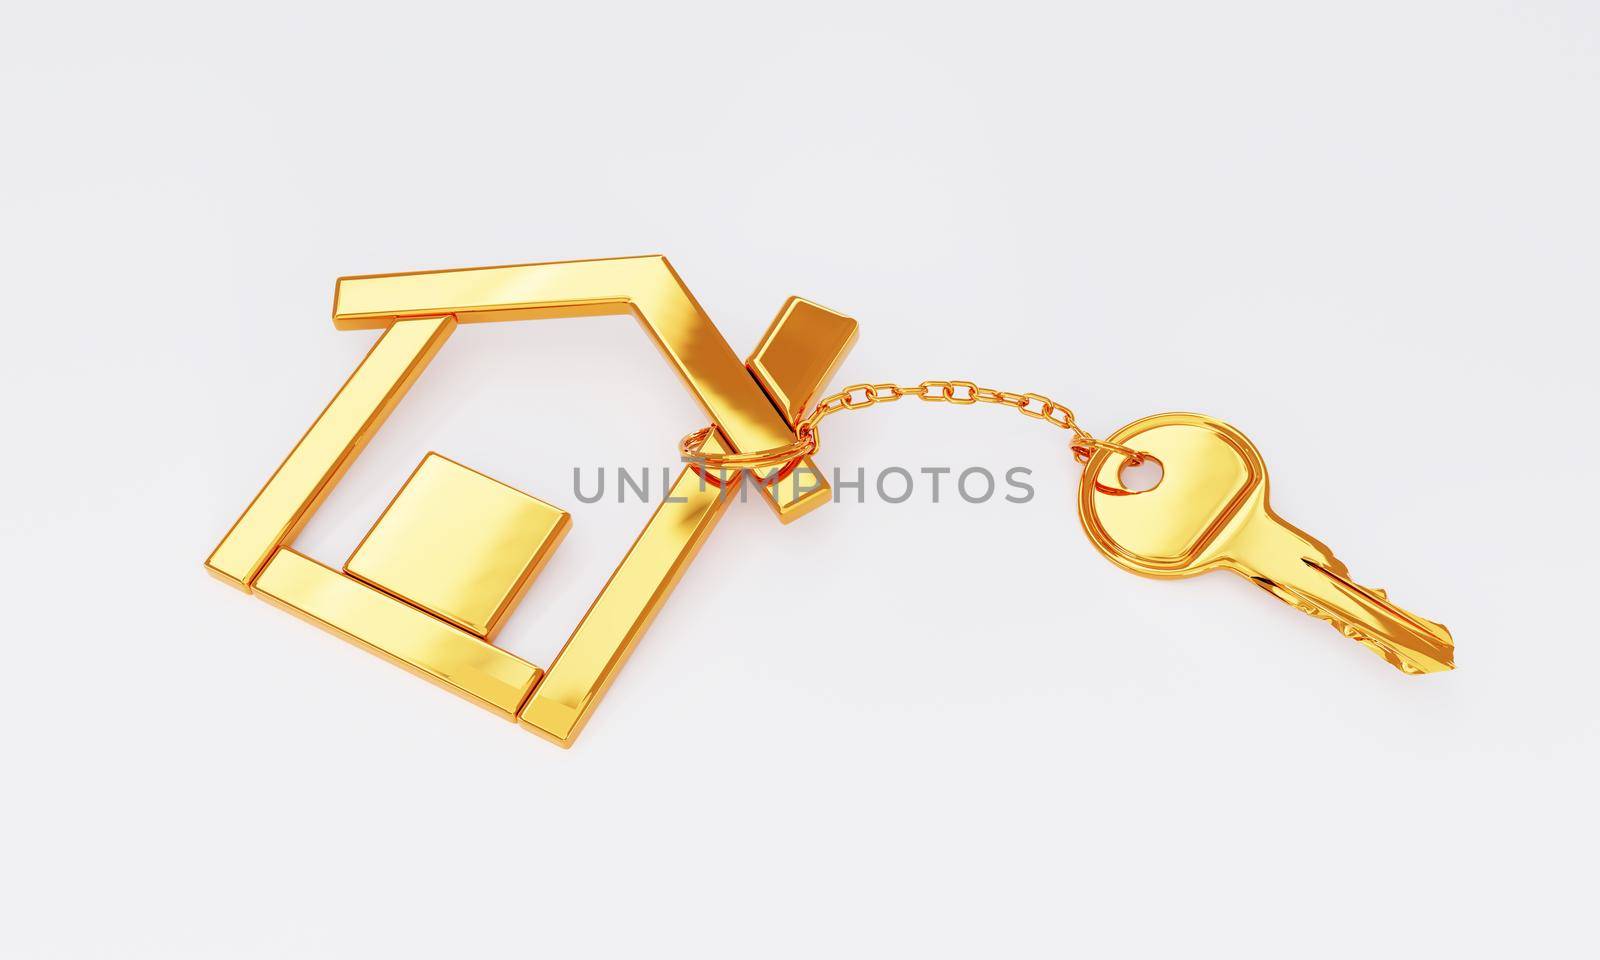 Gold key chain with golden modern house shape key holder on white background. Business construction and architecture concept. 3D illustration rendering